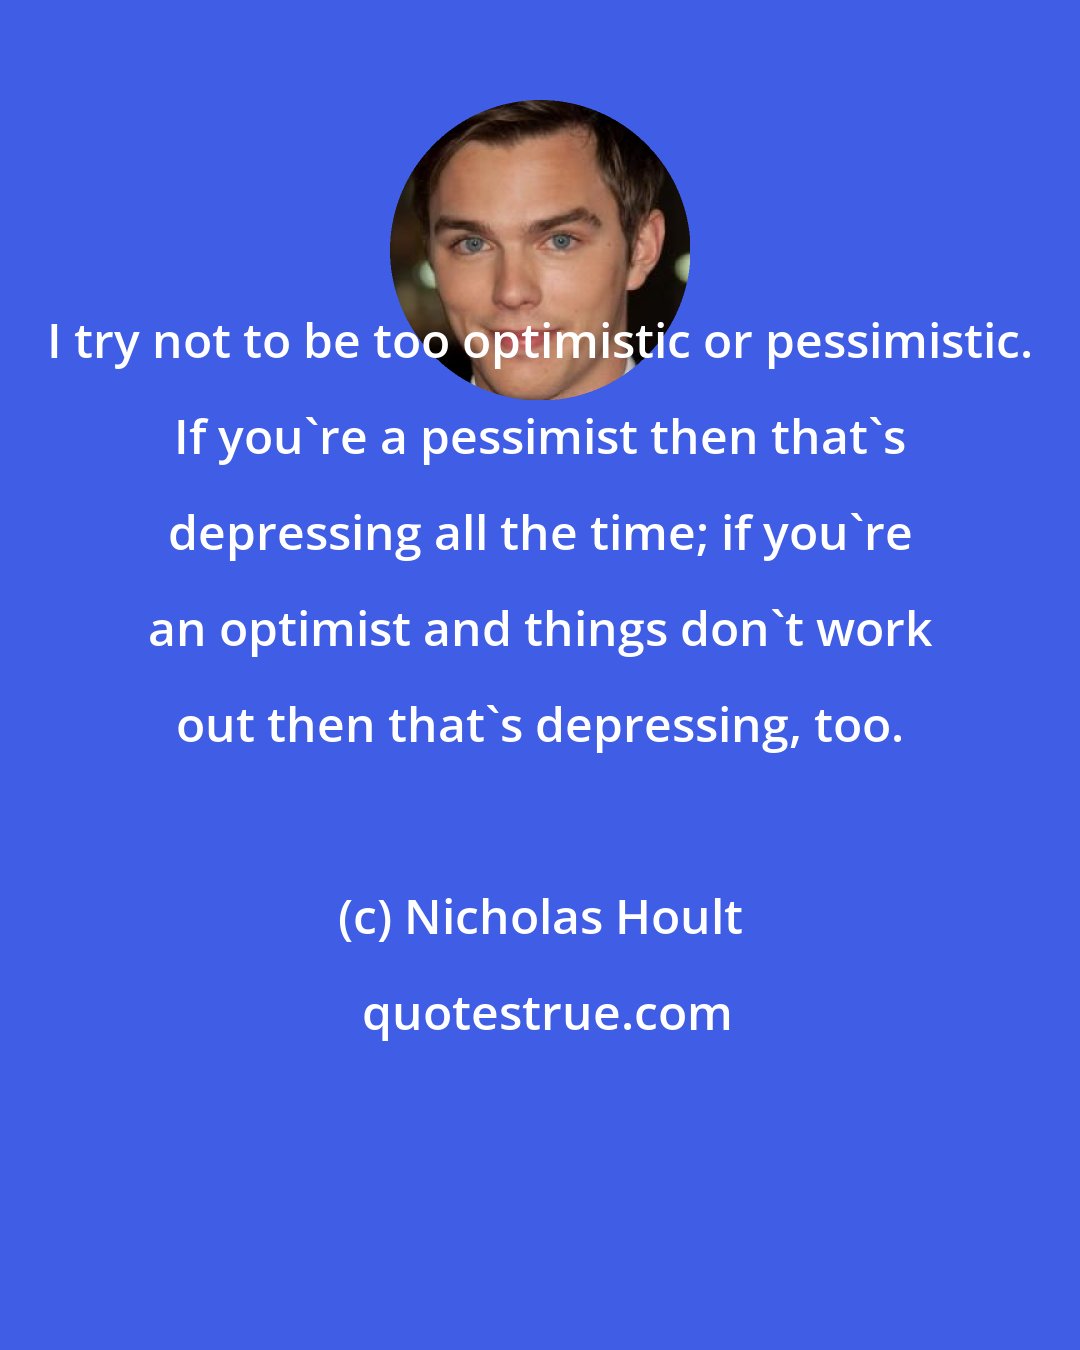 Nicholas Hoult: I try not to be too optimistic or pessimistic. If you're a pessimist then that's depressing all the time; if you're an optimist and things don't work out then that's depressing, too.